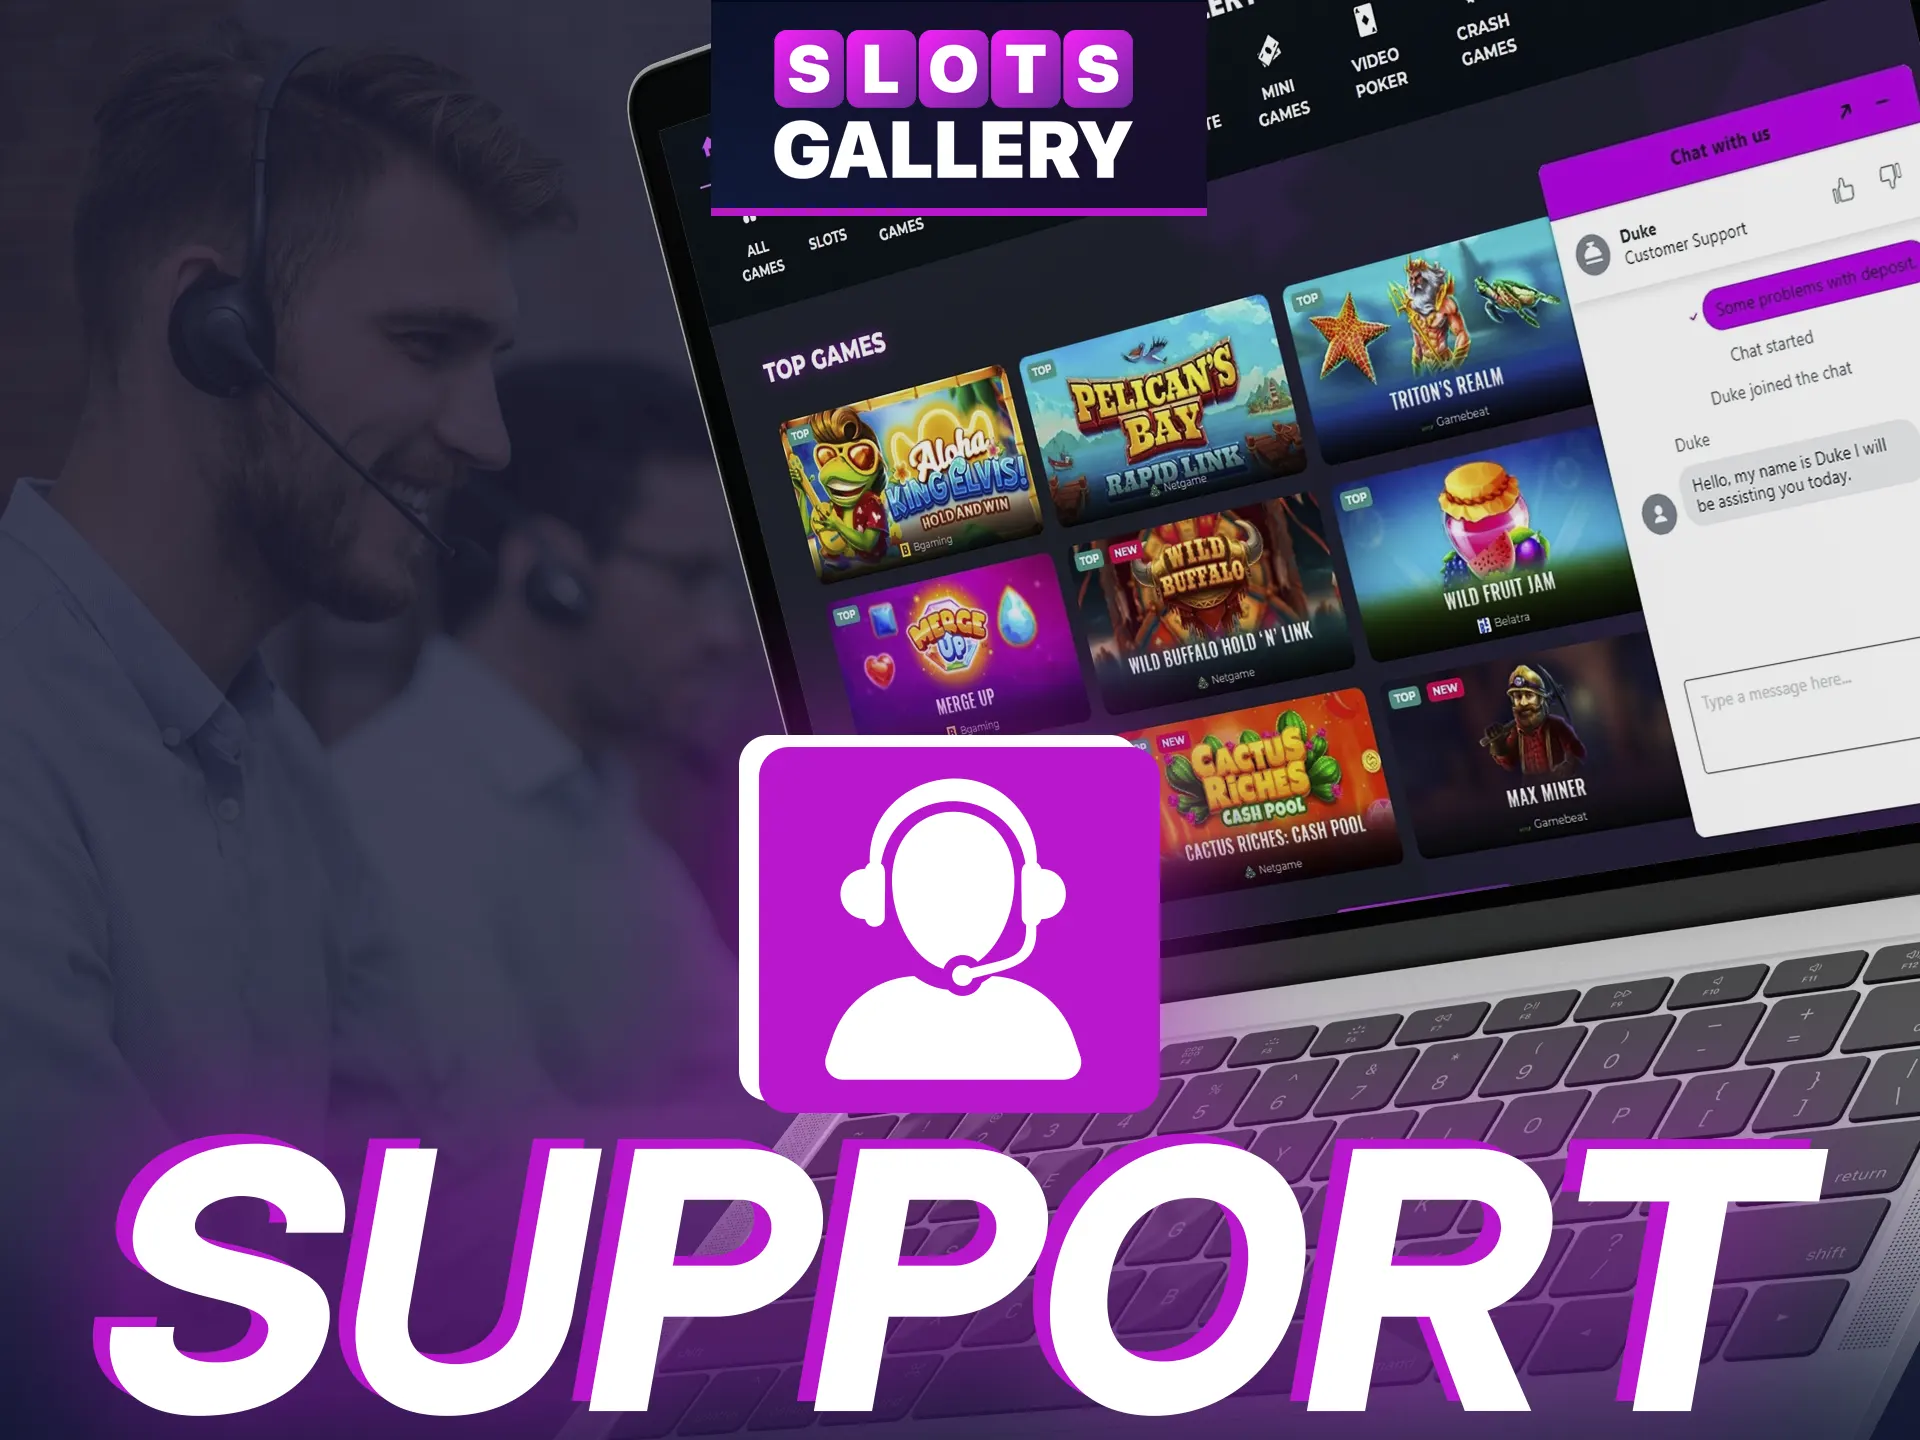 Slots Gallery offers 24/7 expert support for Australians.